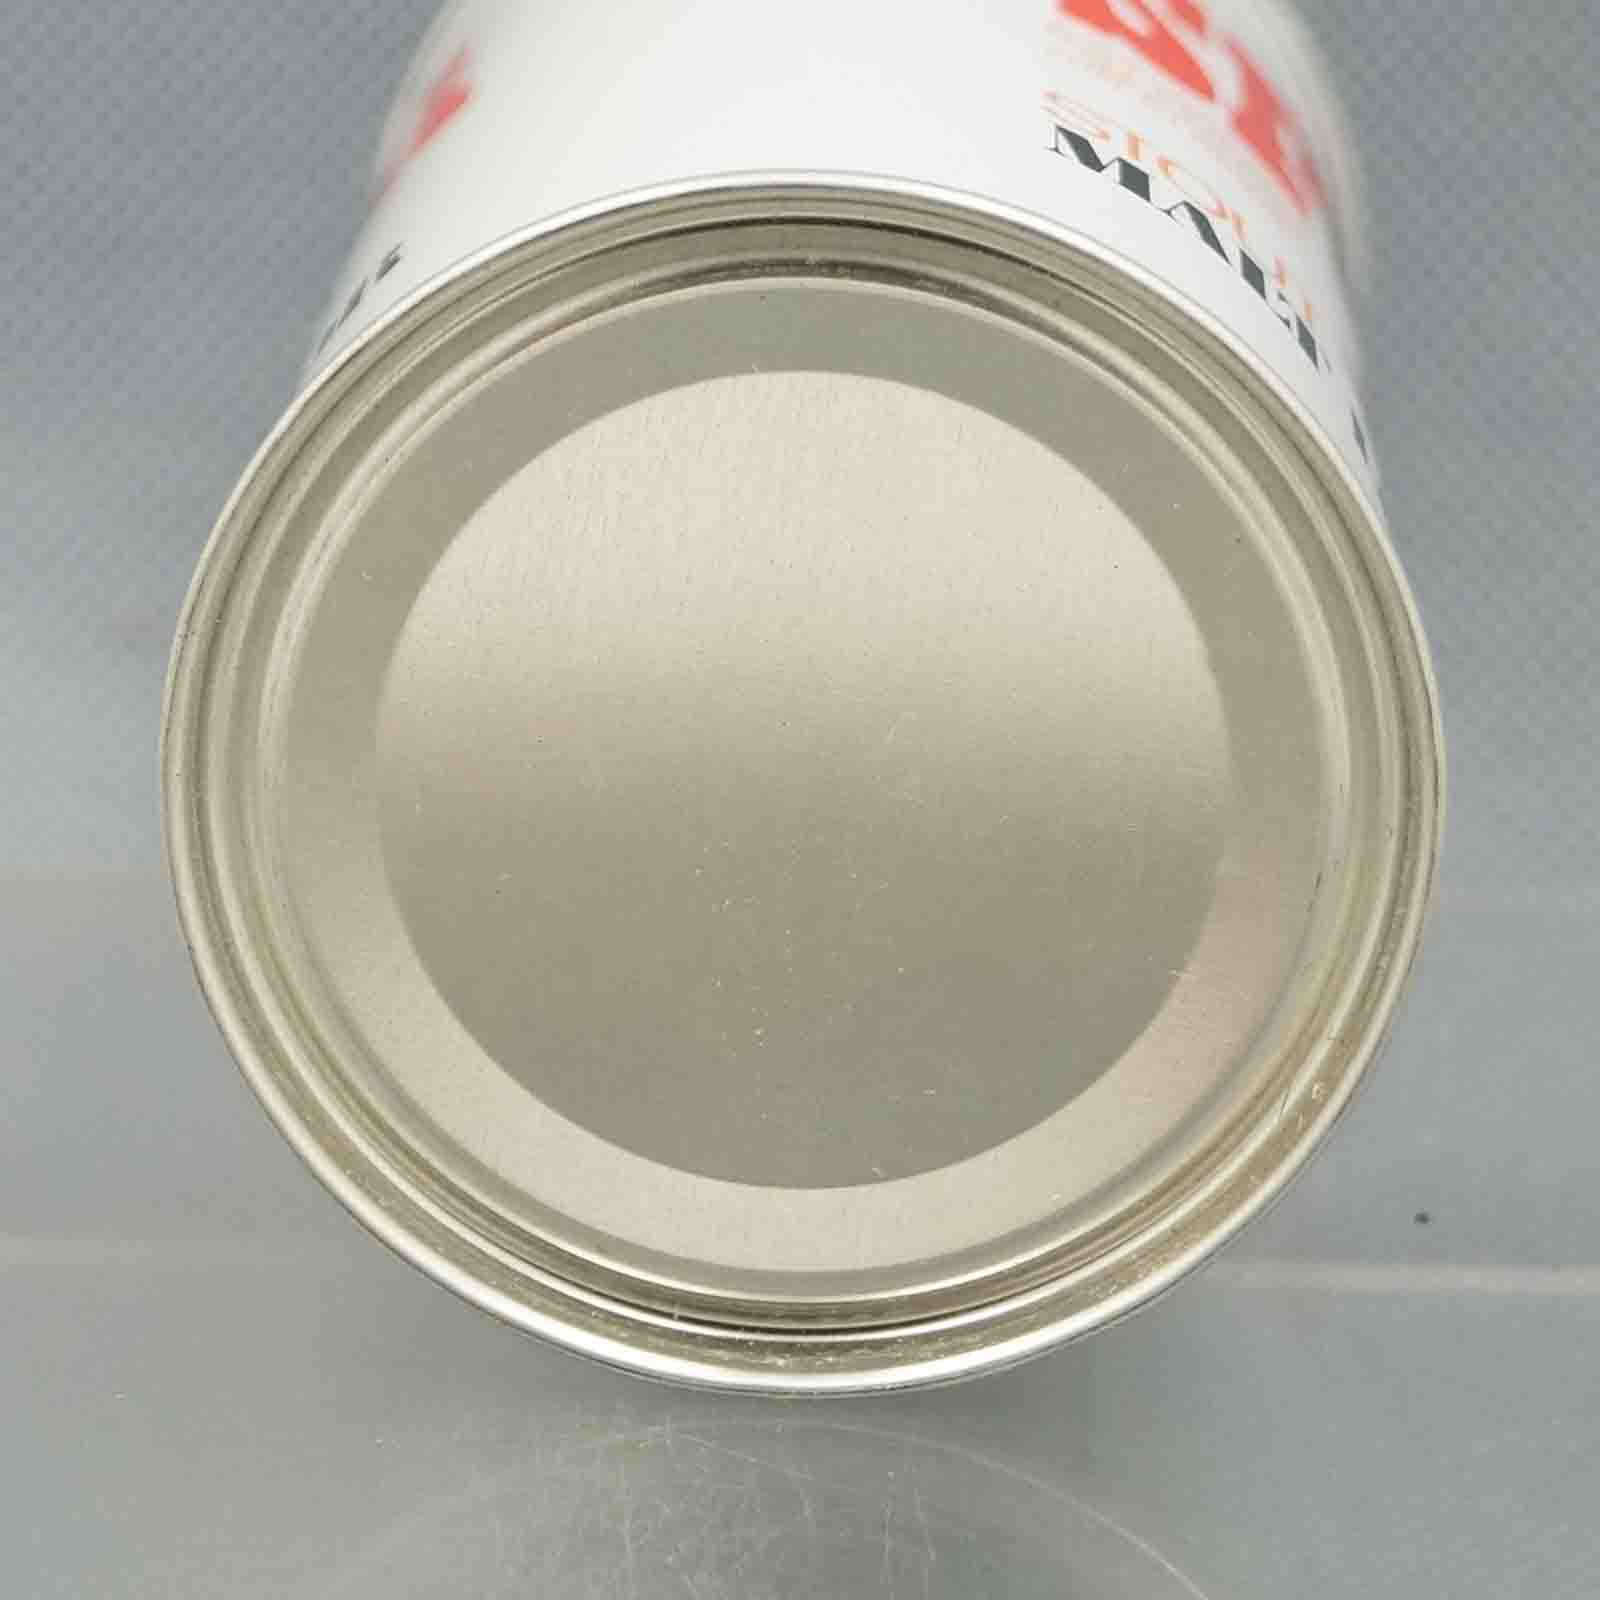 spur 245-38 pull tab beer can 6